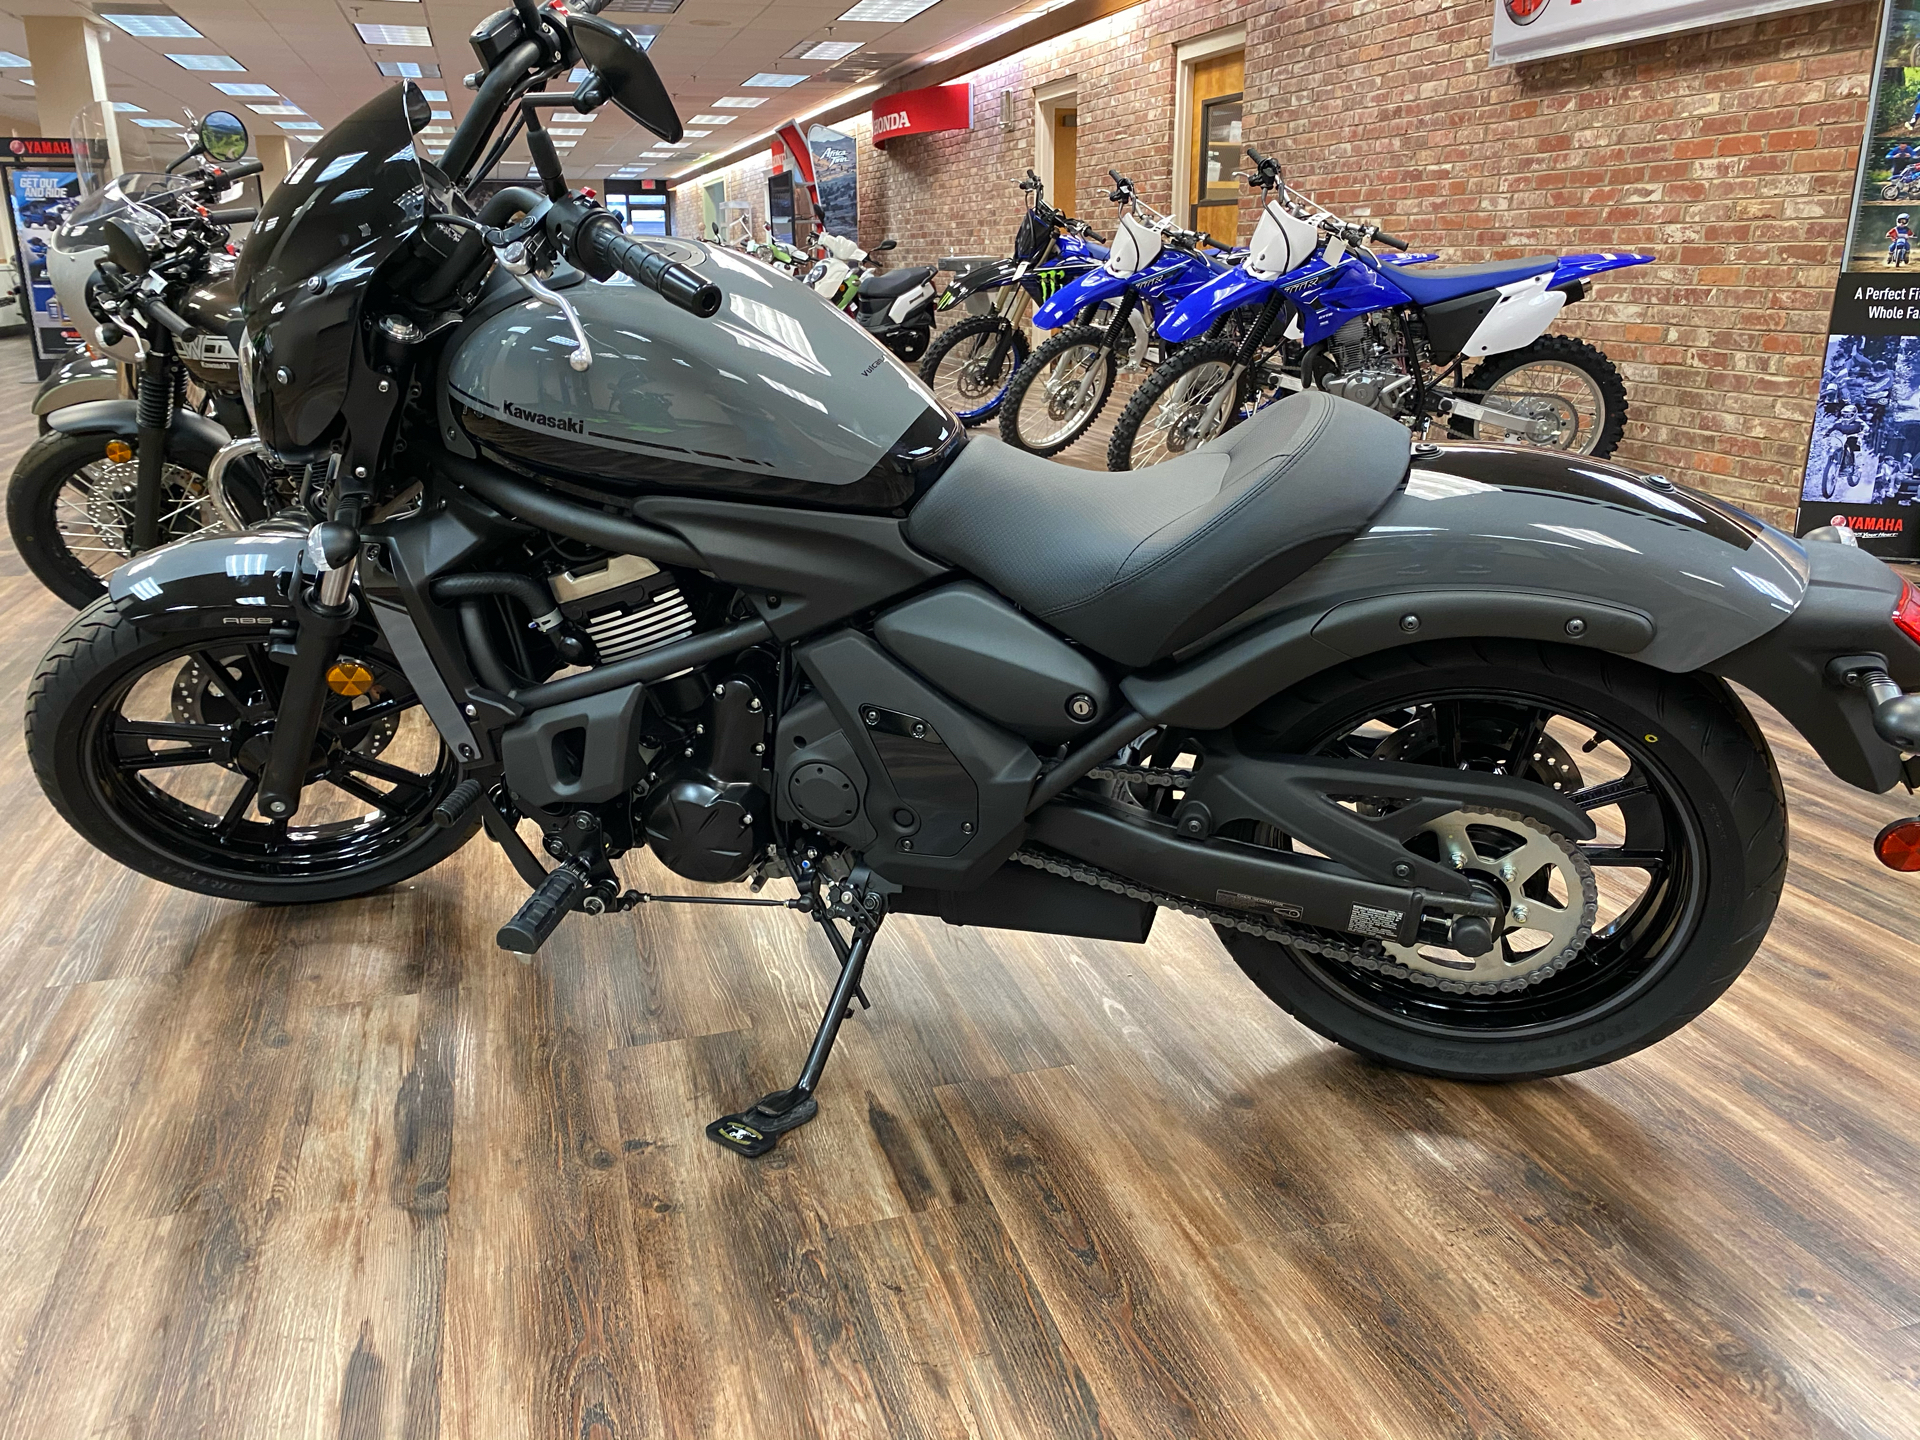 New 2021 Kawasaki Vulcan S Abs Cafe Motorcycles In Statesville Nc Stock Number A06149 Greatwesternmotorcycles Com